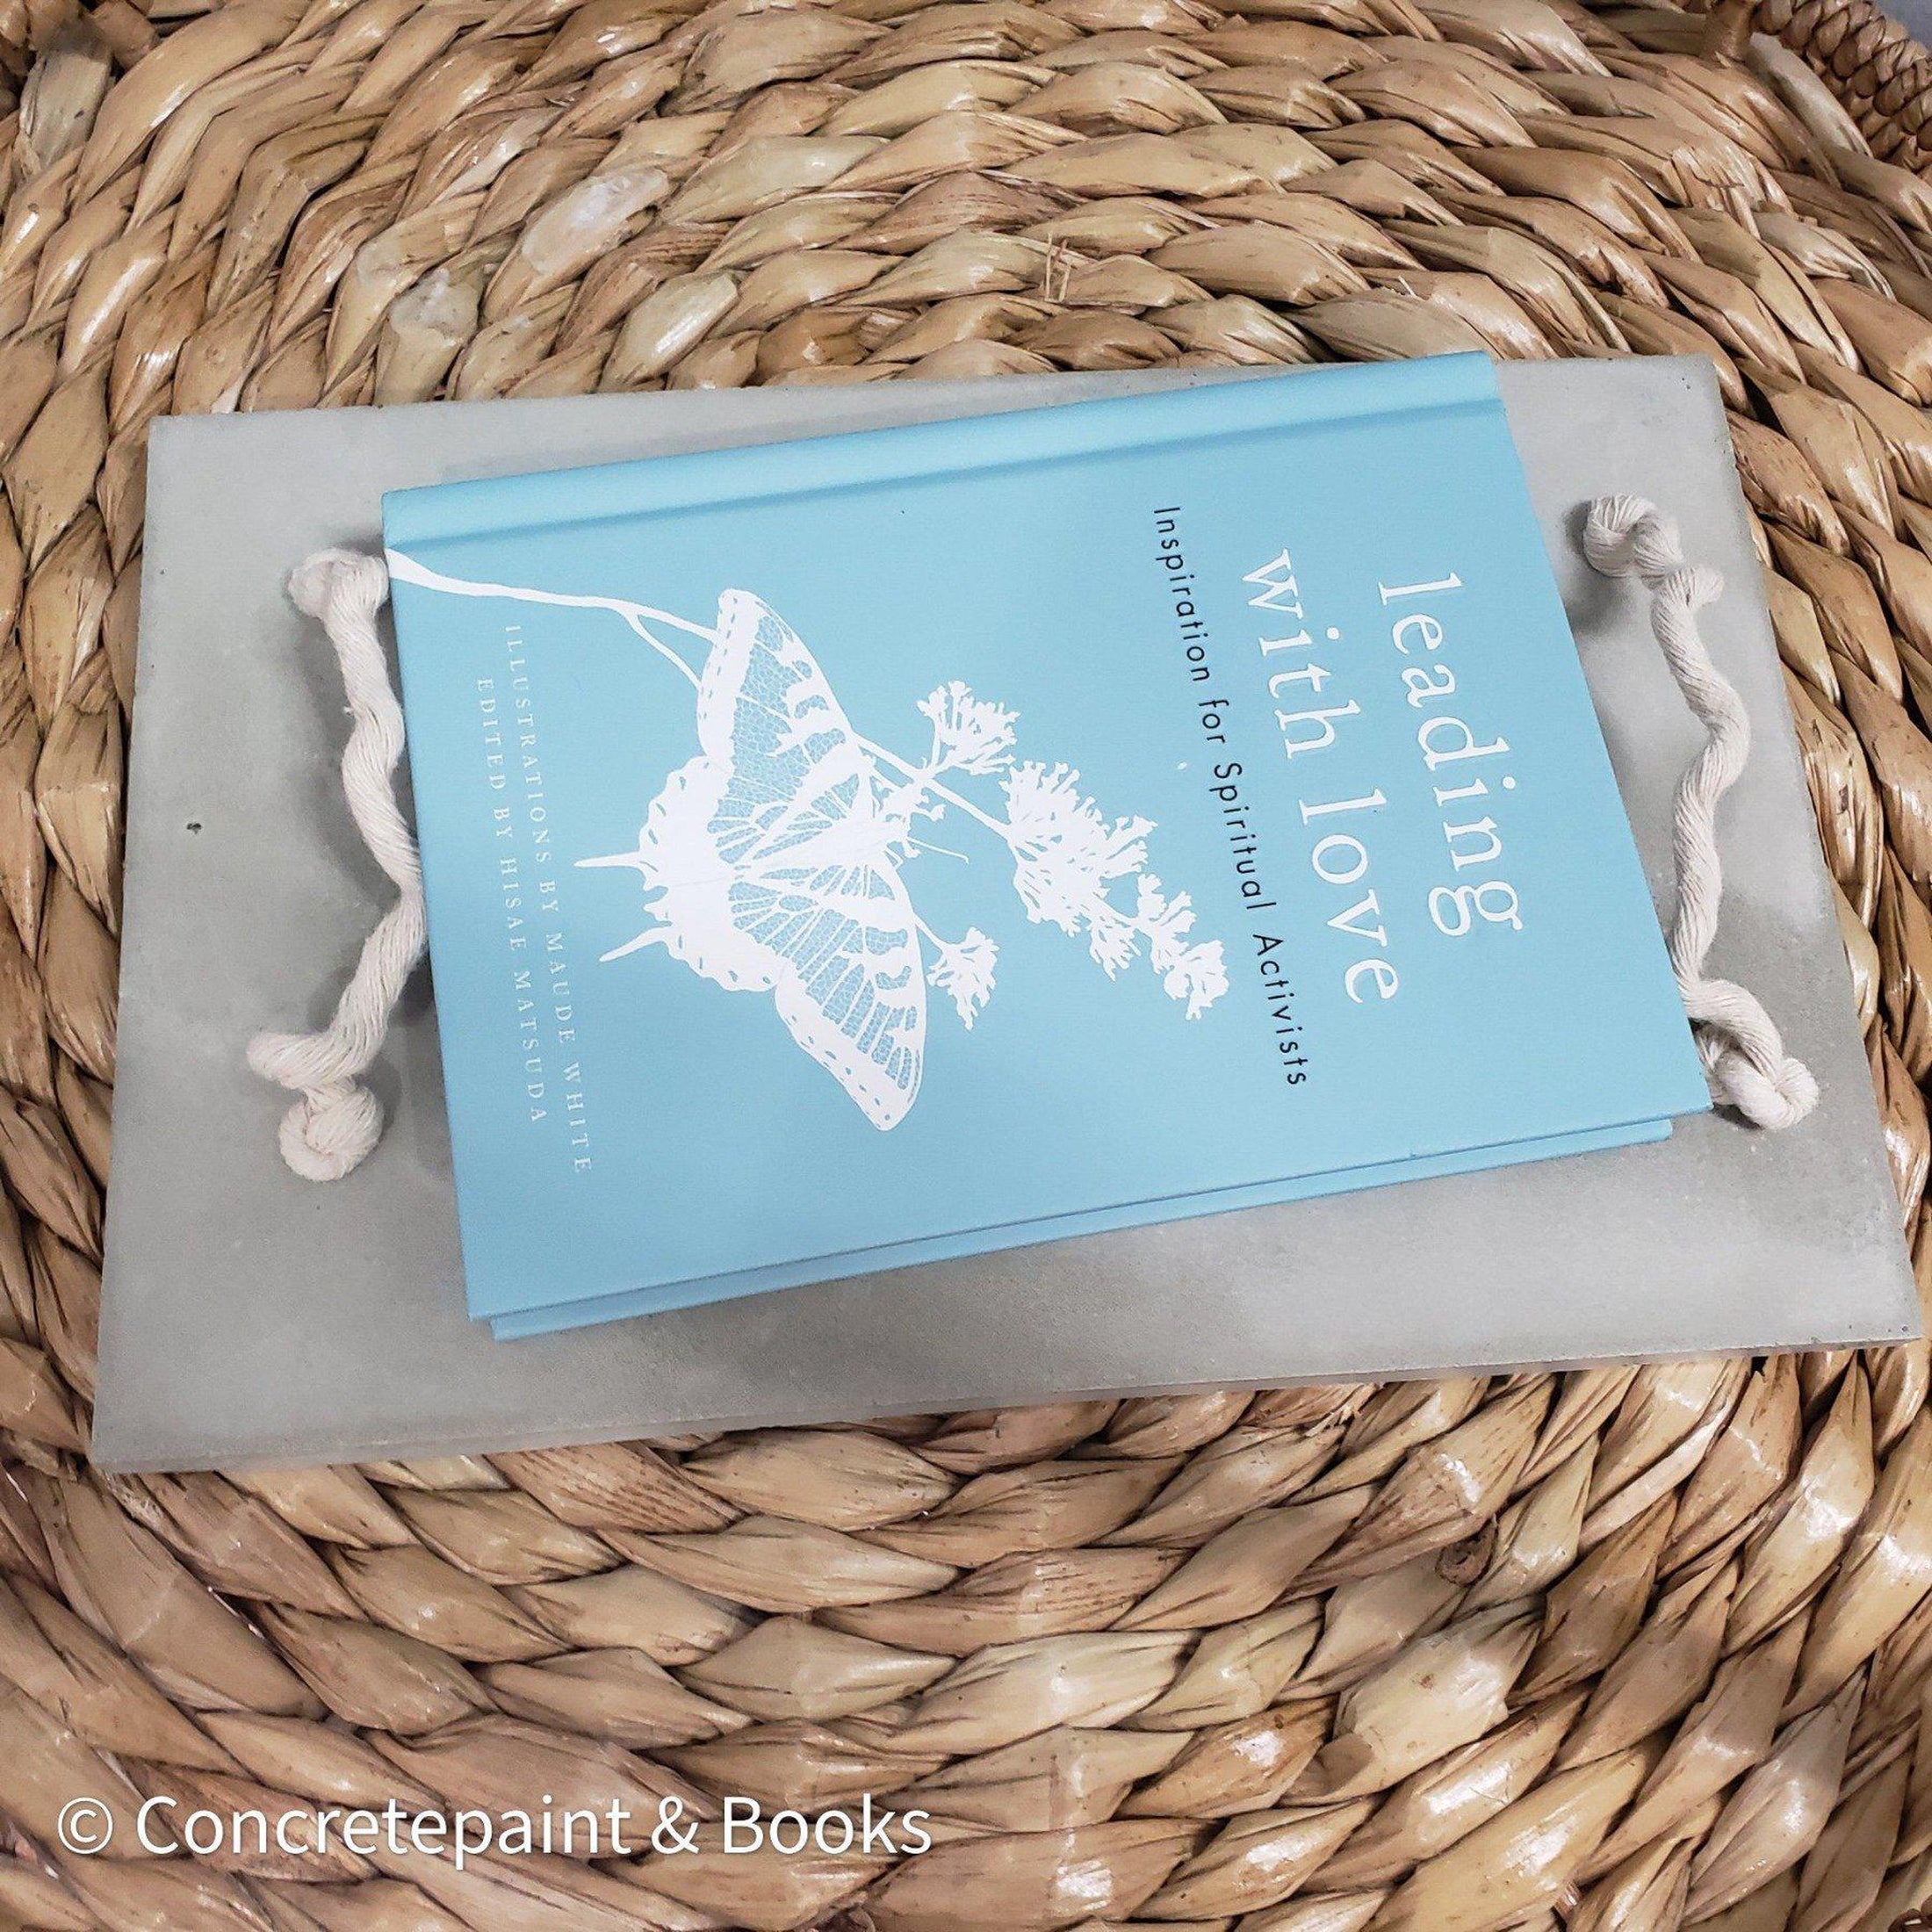 Decorative concrete tray with light blue hardcover book on top. Leading with Love Book and concrete home décor. 